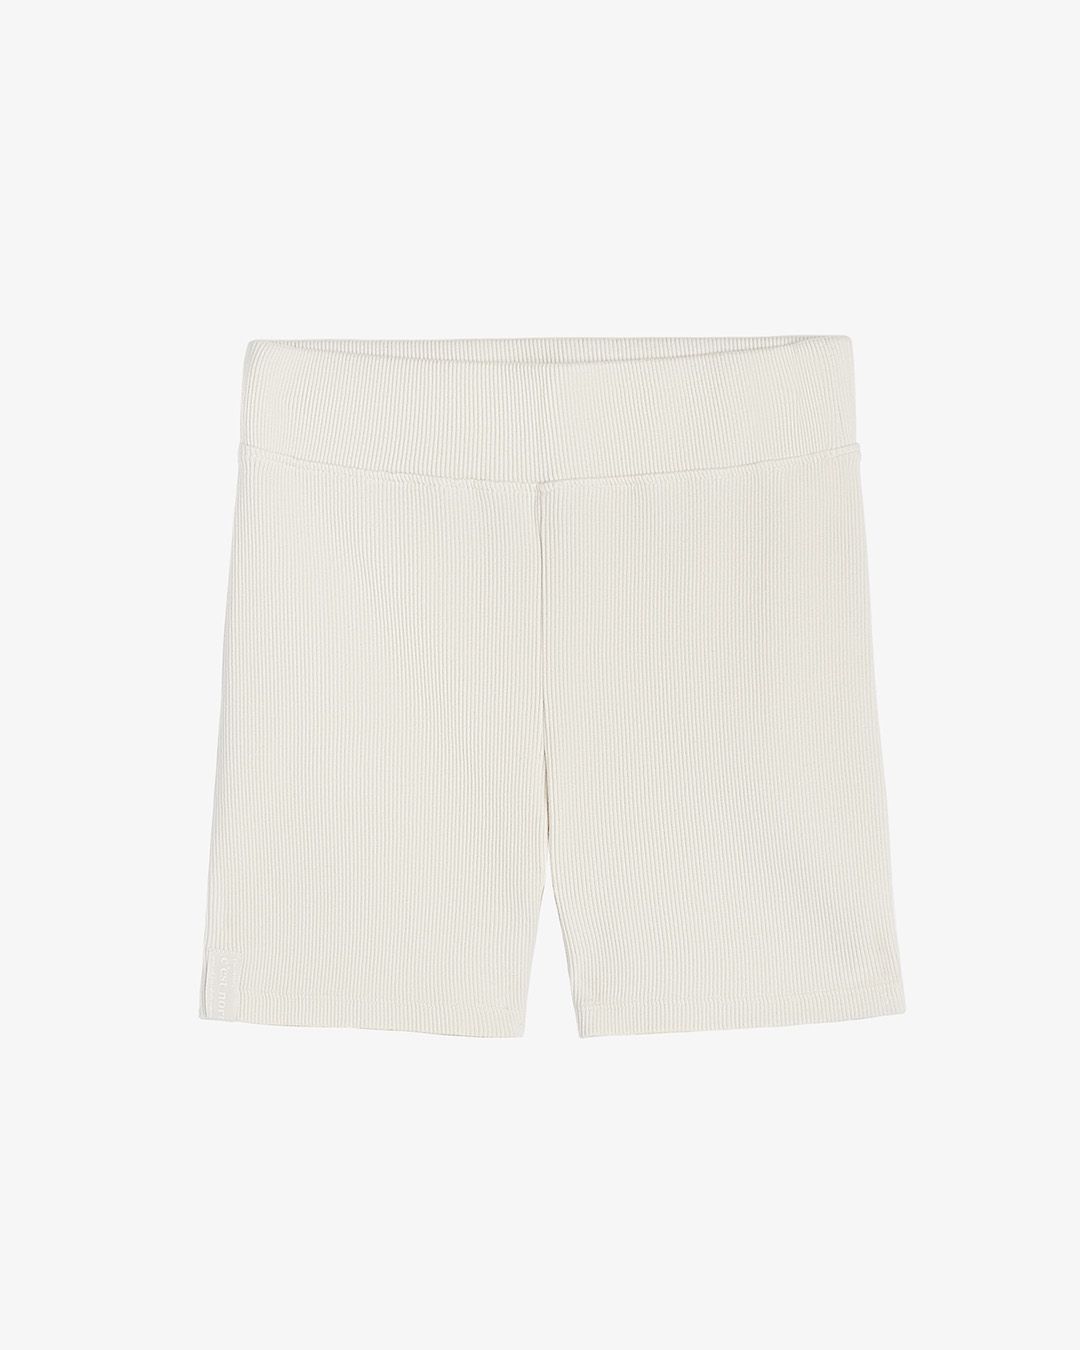 The Comfy Shorts | c'est normal - Around here.